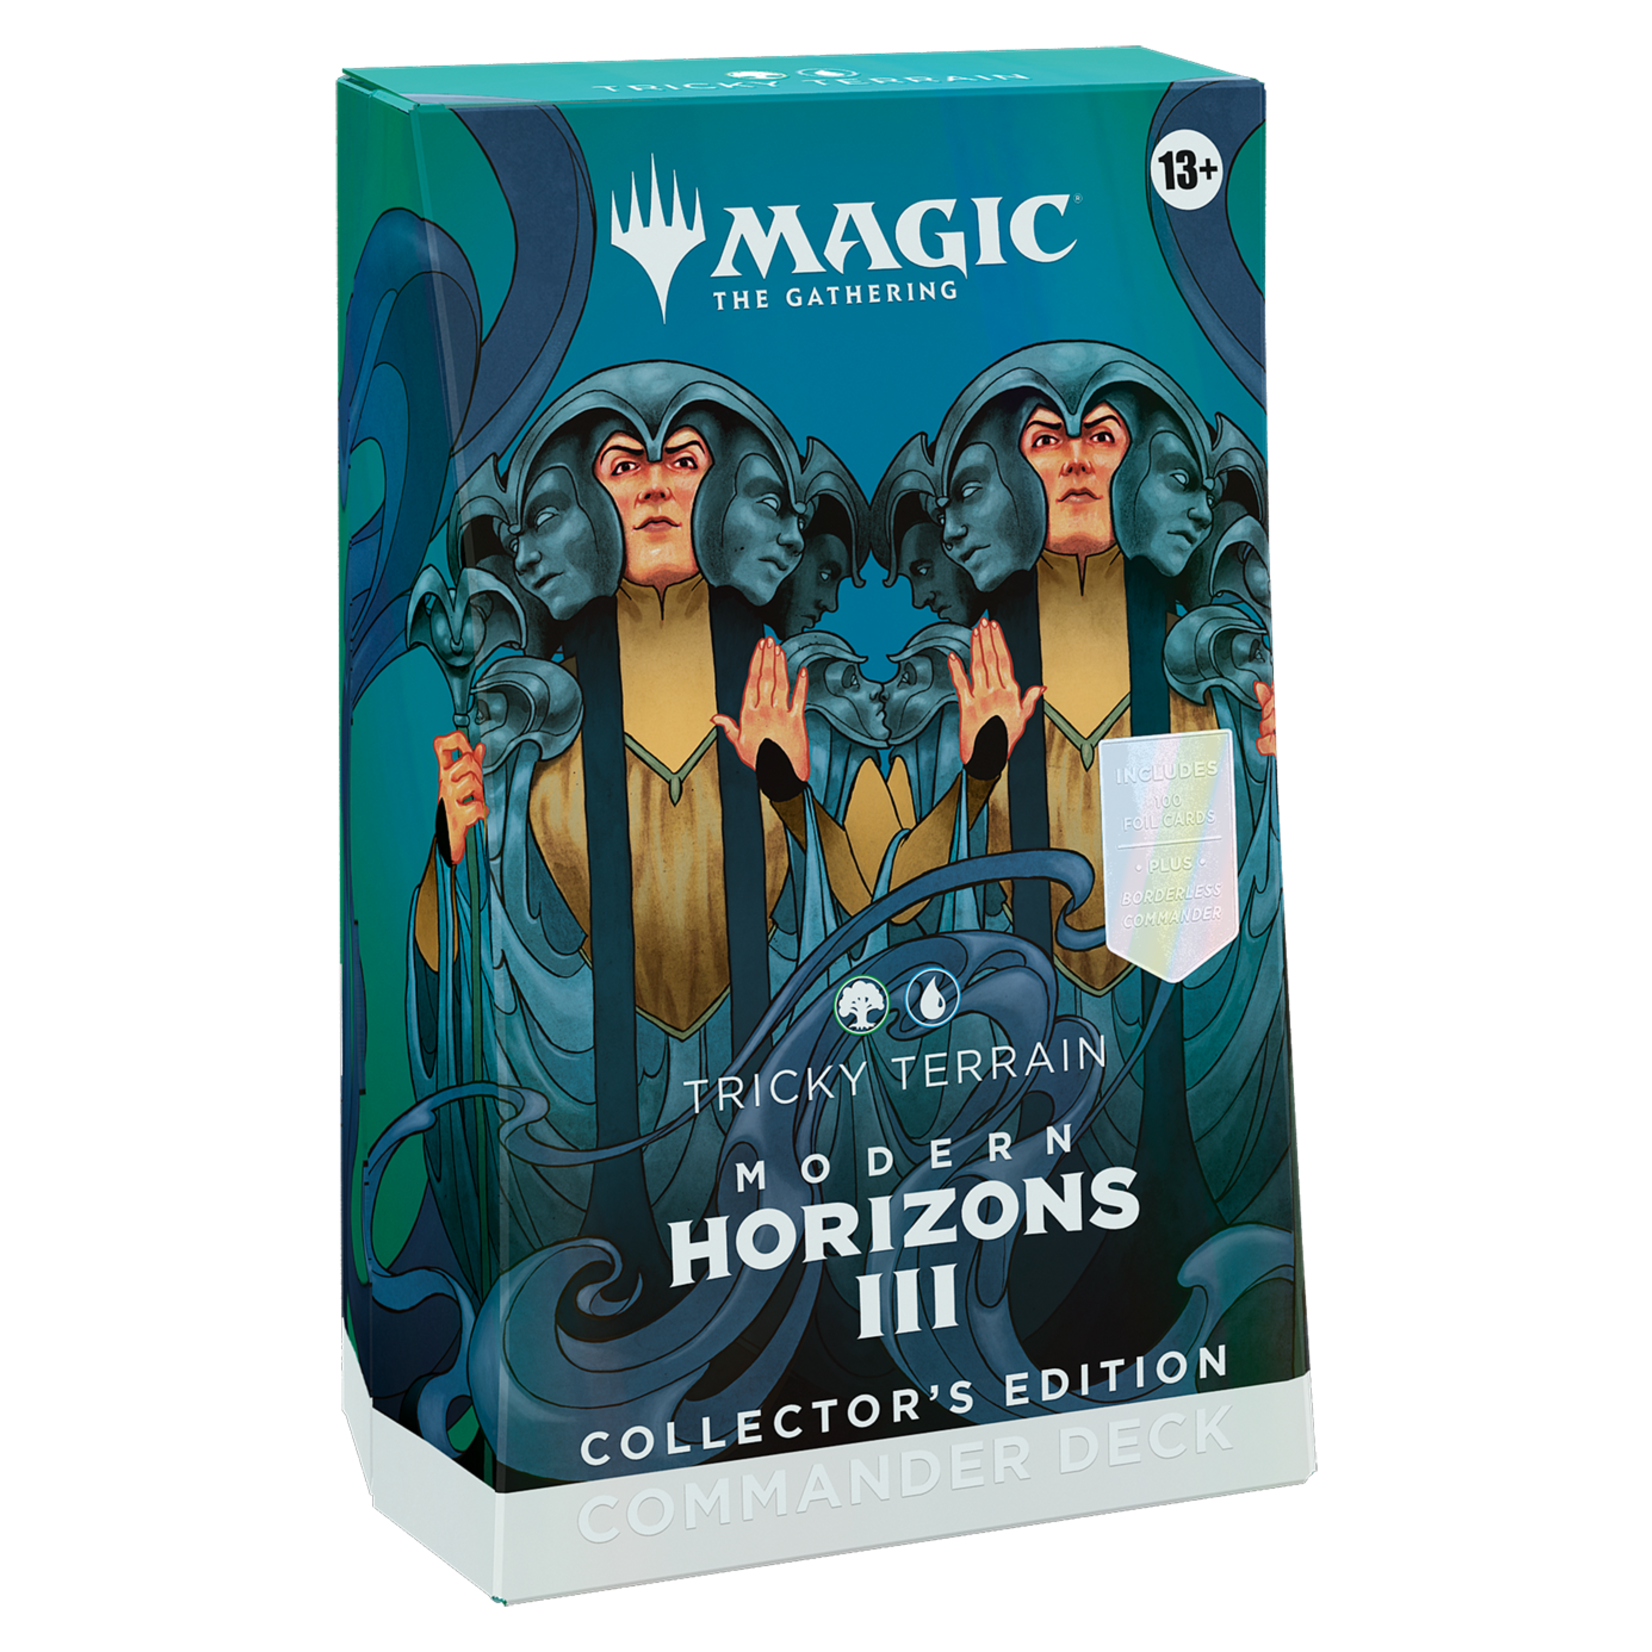 Magic: The Gathering Magic: The Gathering – Modern Horizons 3 Commander Deck Collector Edition (Tricky Terrain)